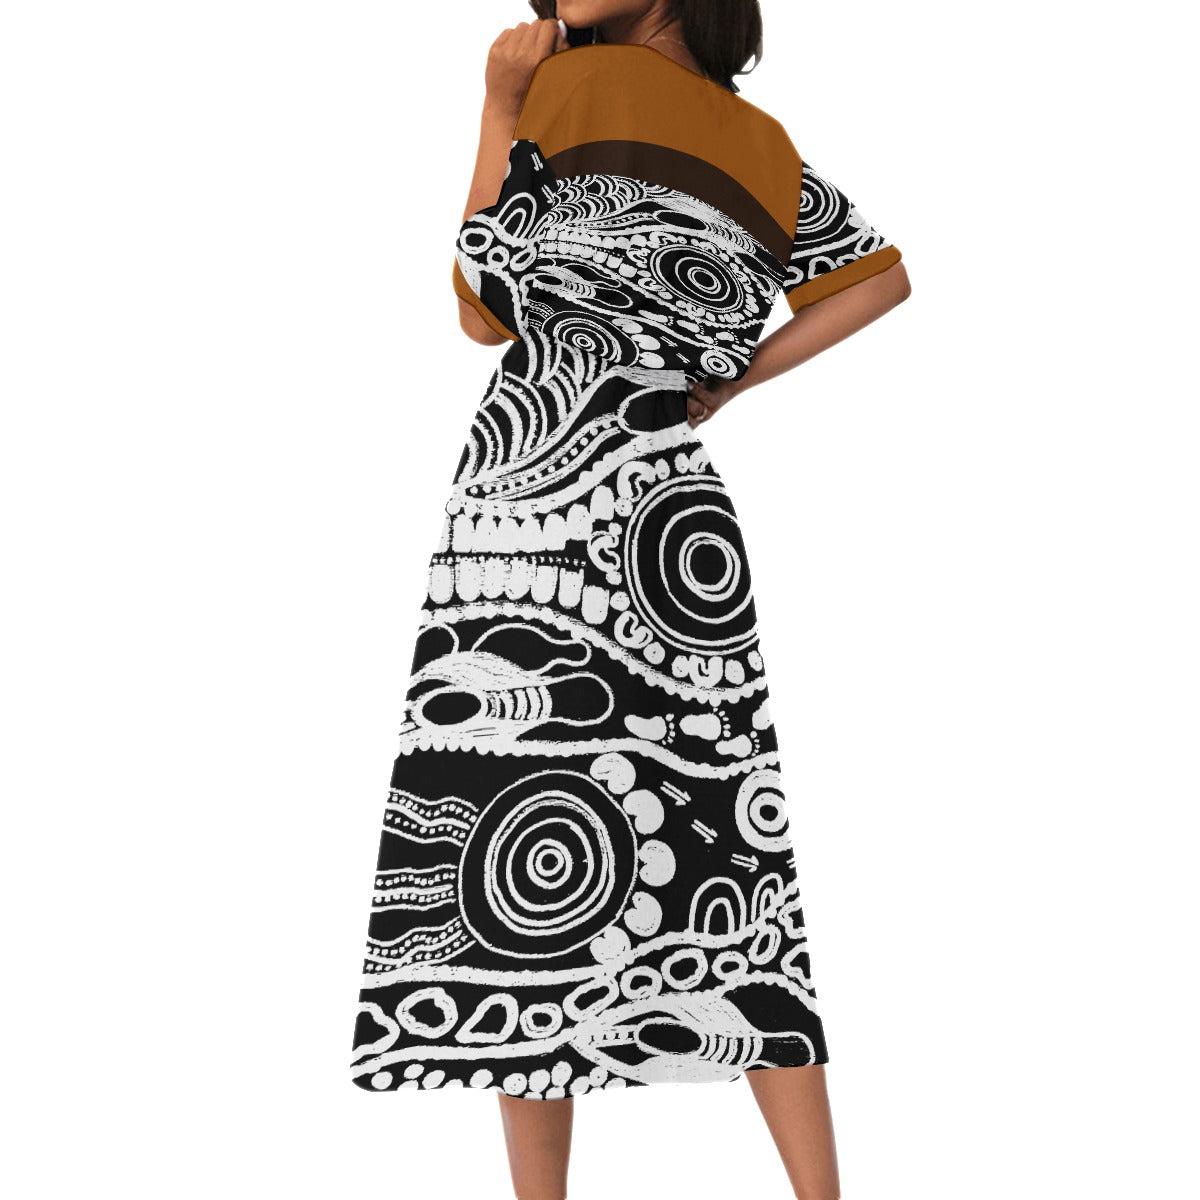 More to be Done Sophistication Dress by Koori Threads